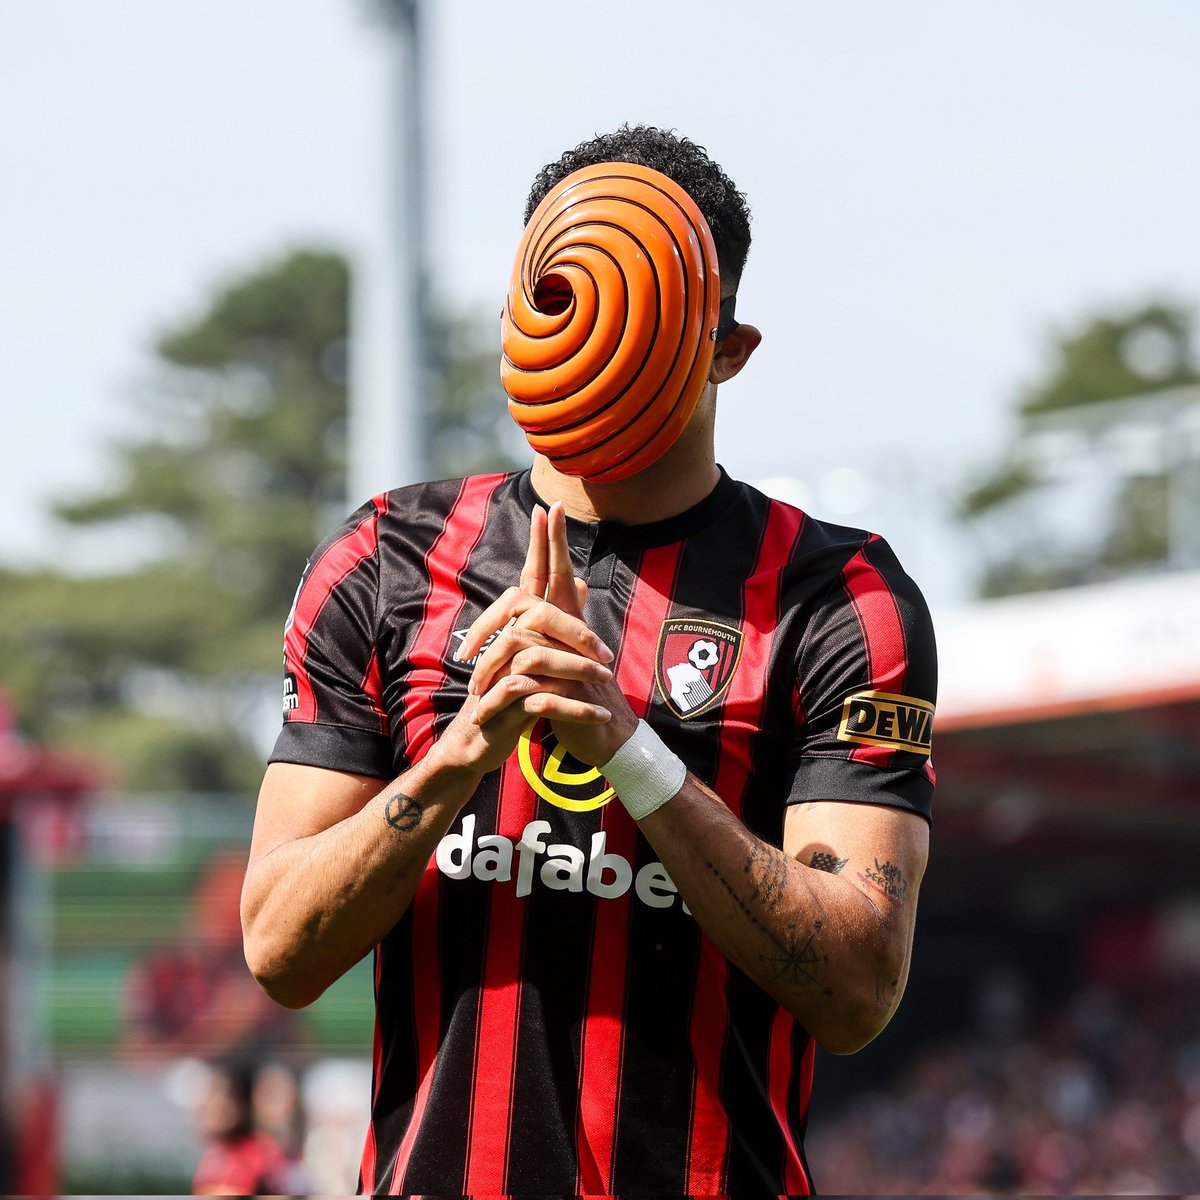 Dominic Solanke, The Bournemouth player from the Premiere League, celebrated his goal against Brentford FC with the iconic Akatsuki Tobi mask from Naruto.